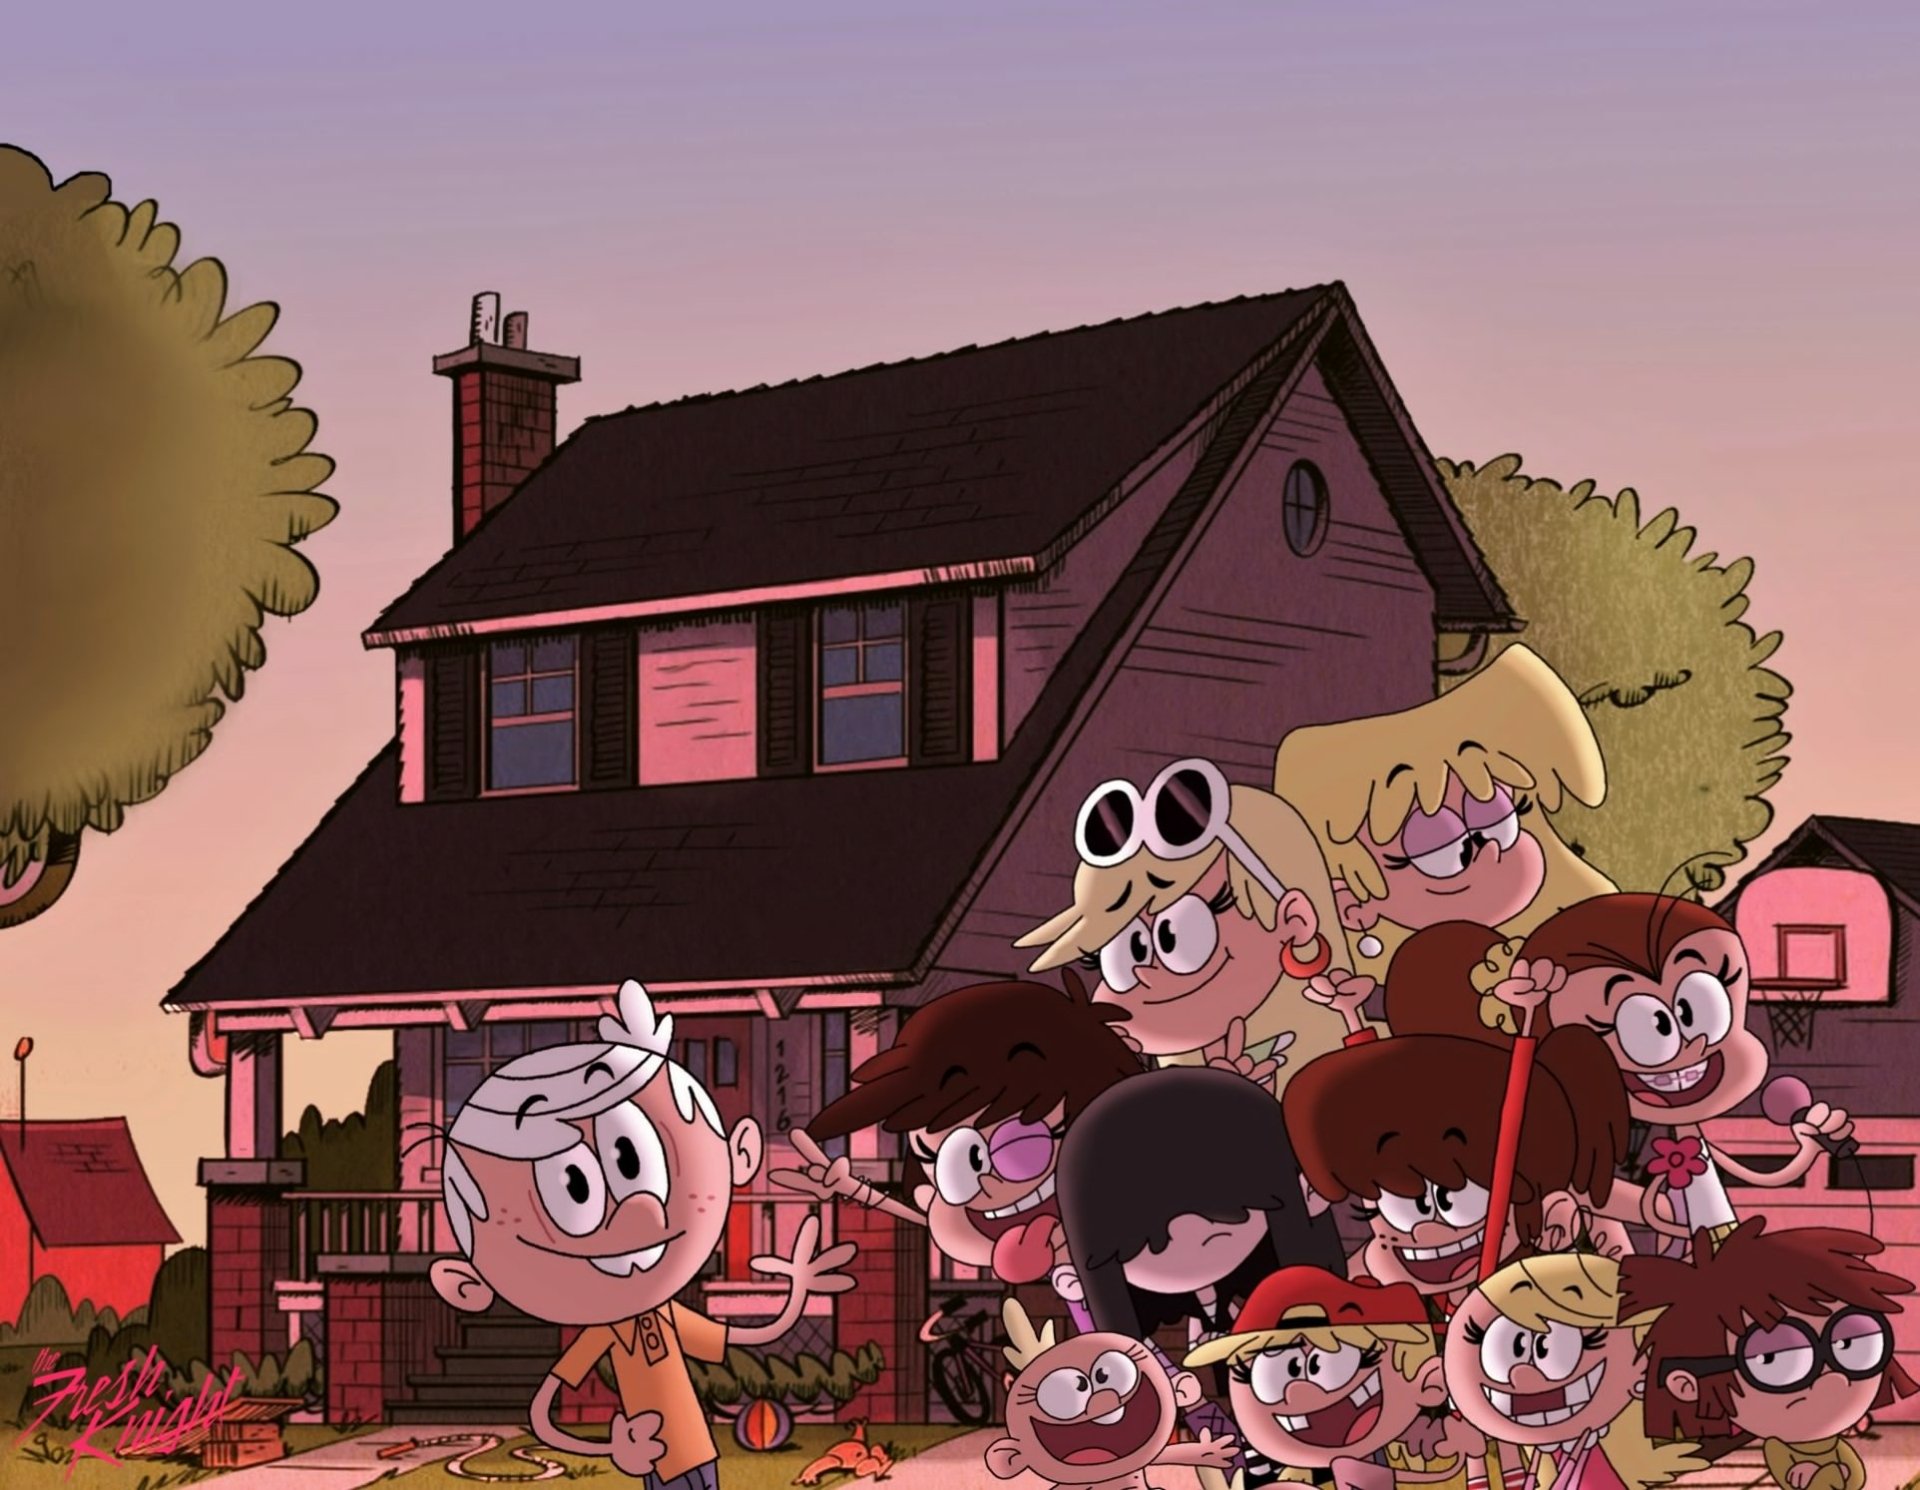 The loud house HD wallpapers  Pxfuel